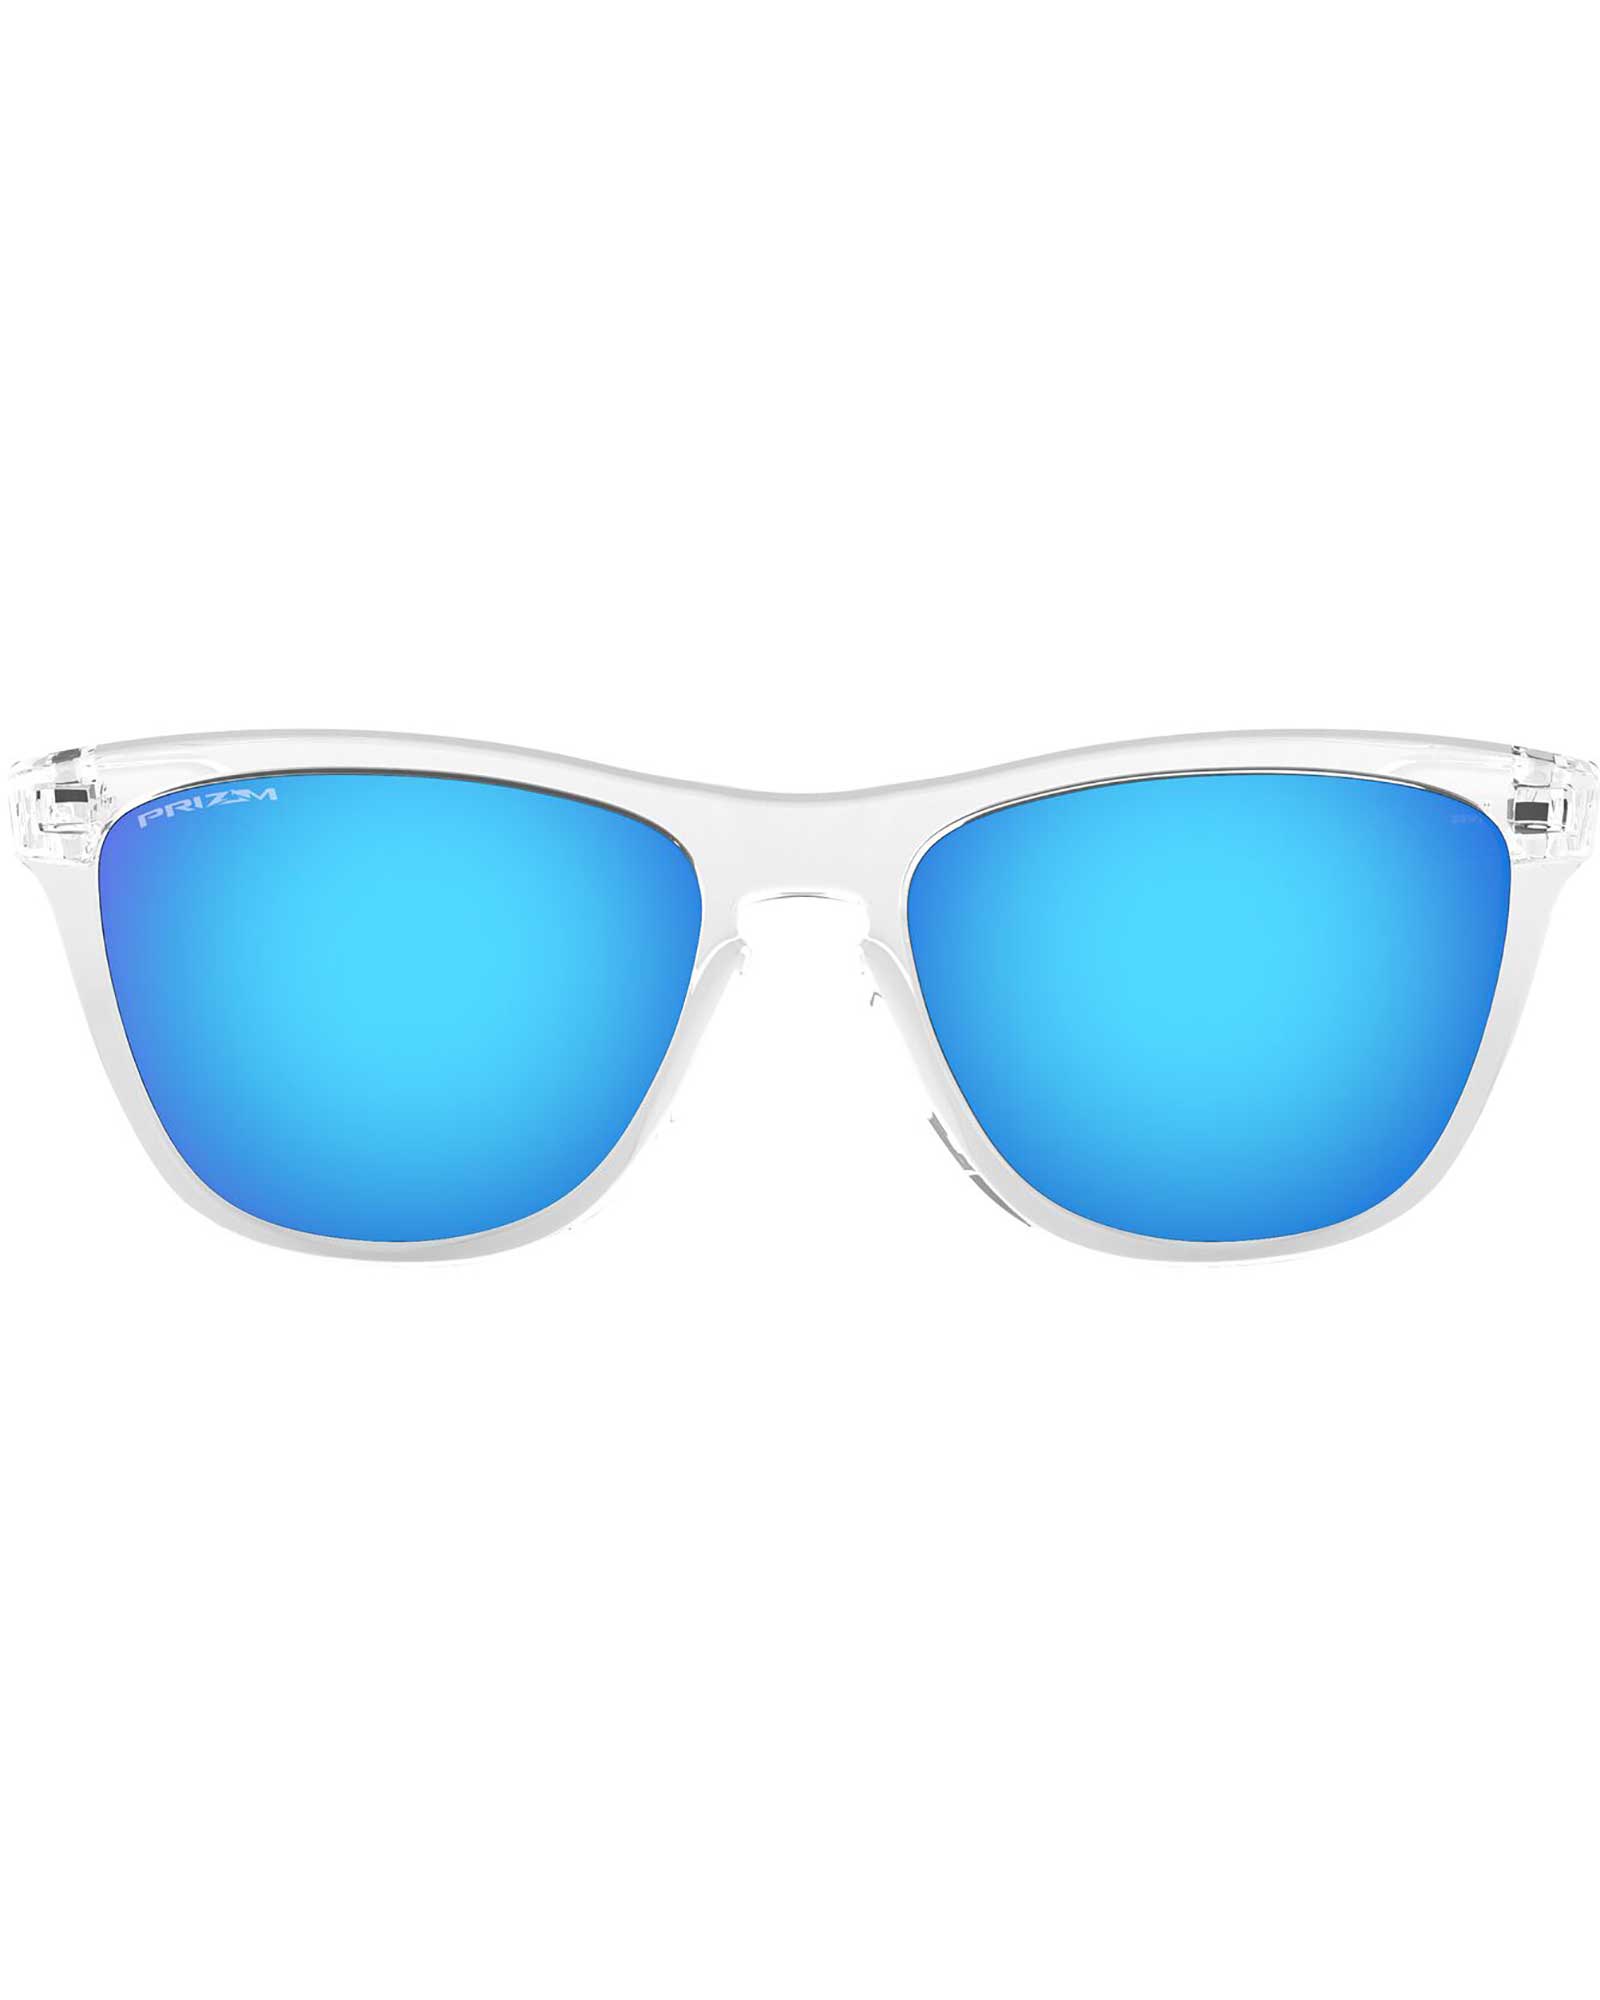 Oakley Frogskins Crystal Clear / Prizm Sapphire Sunglasses - Crystal Clear